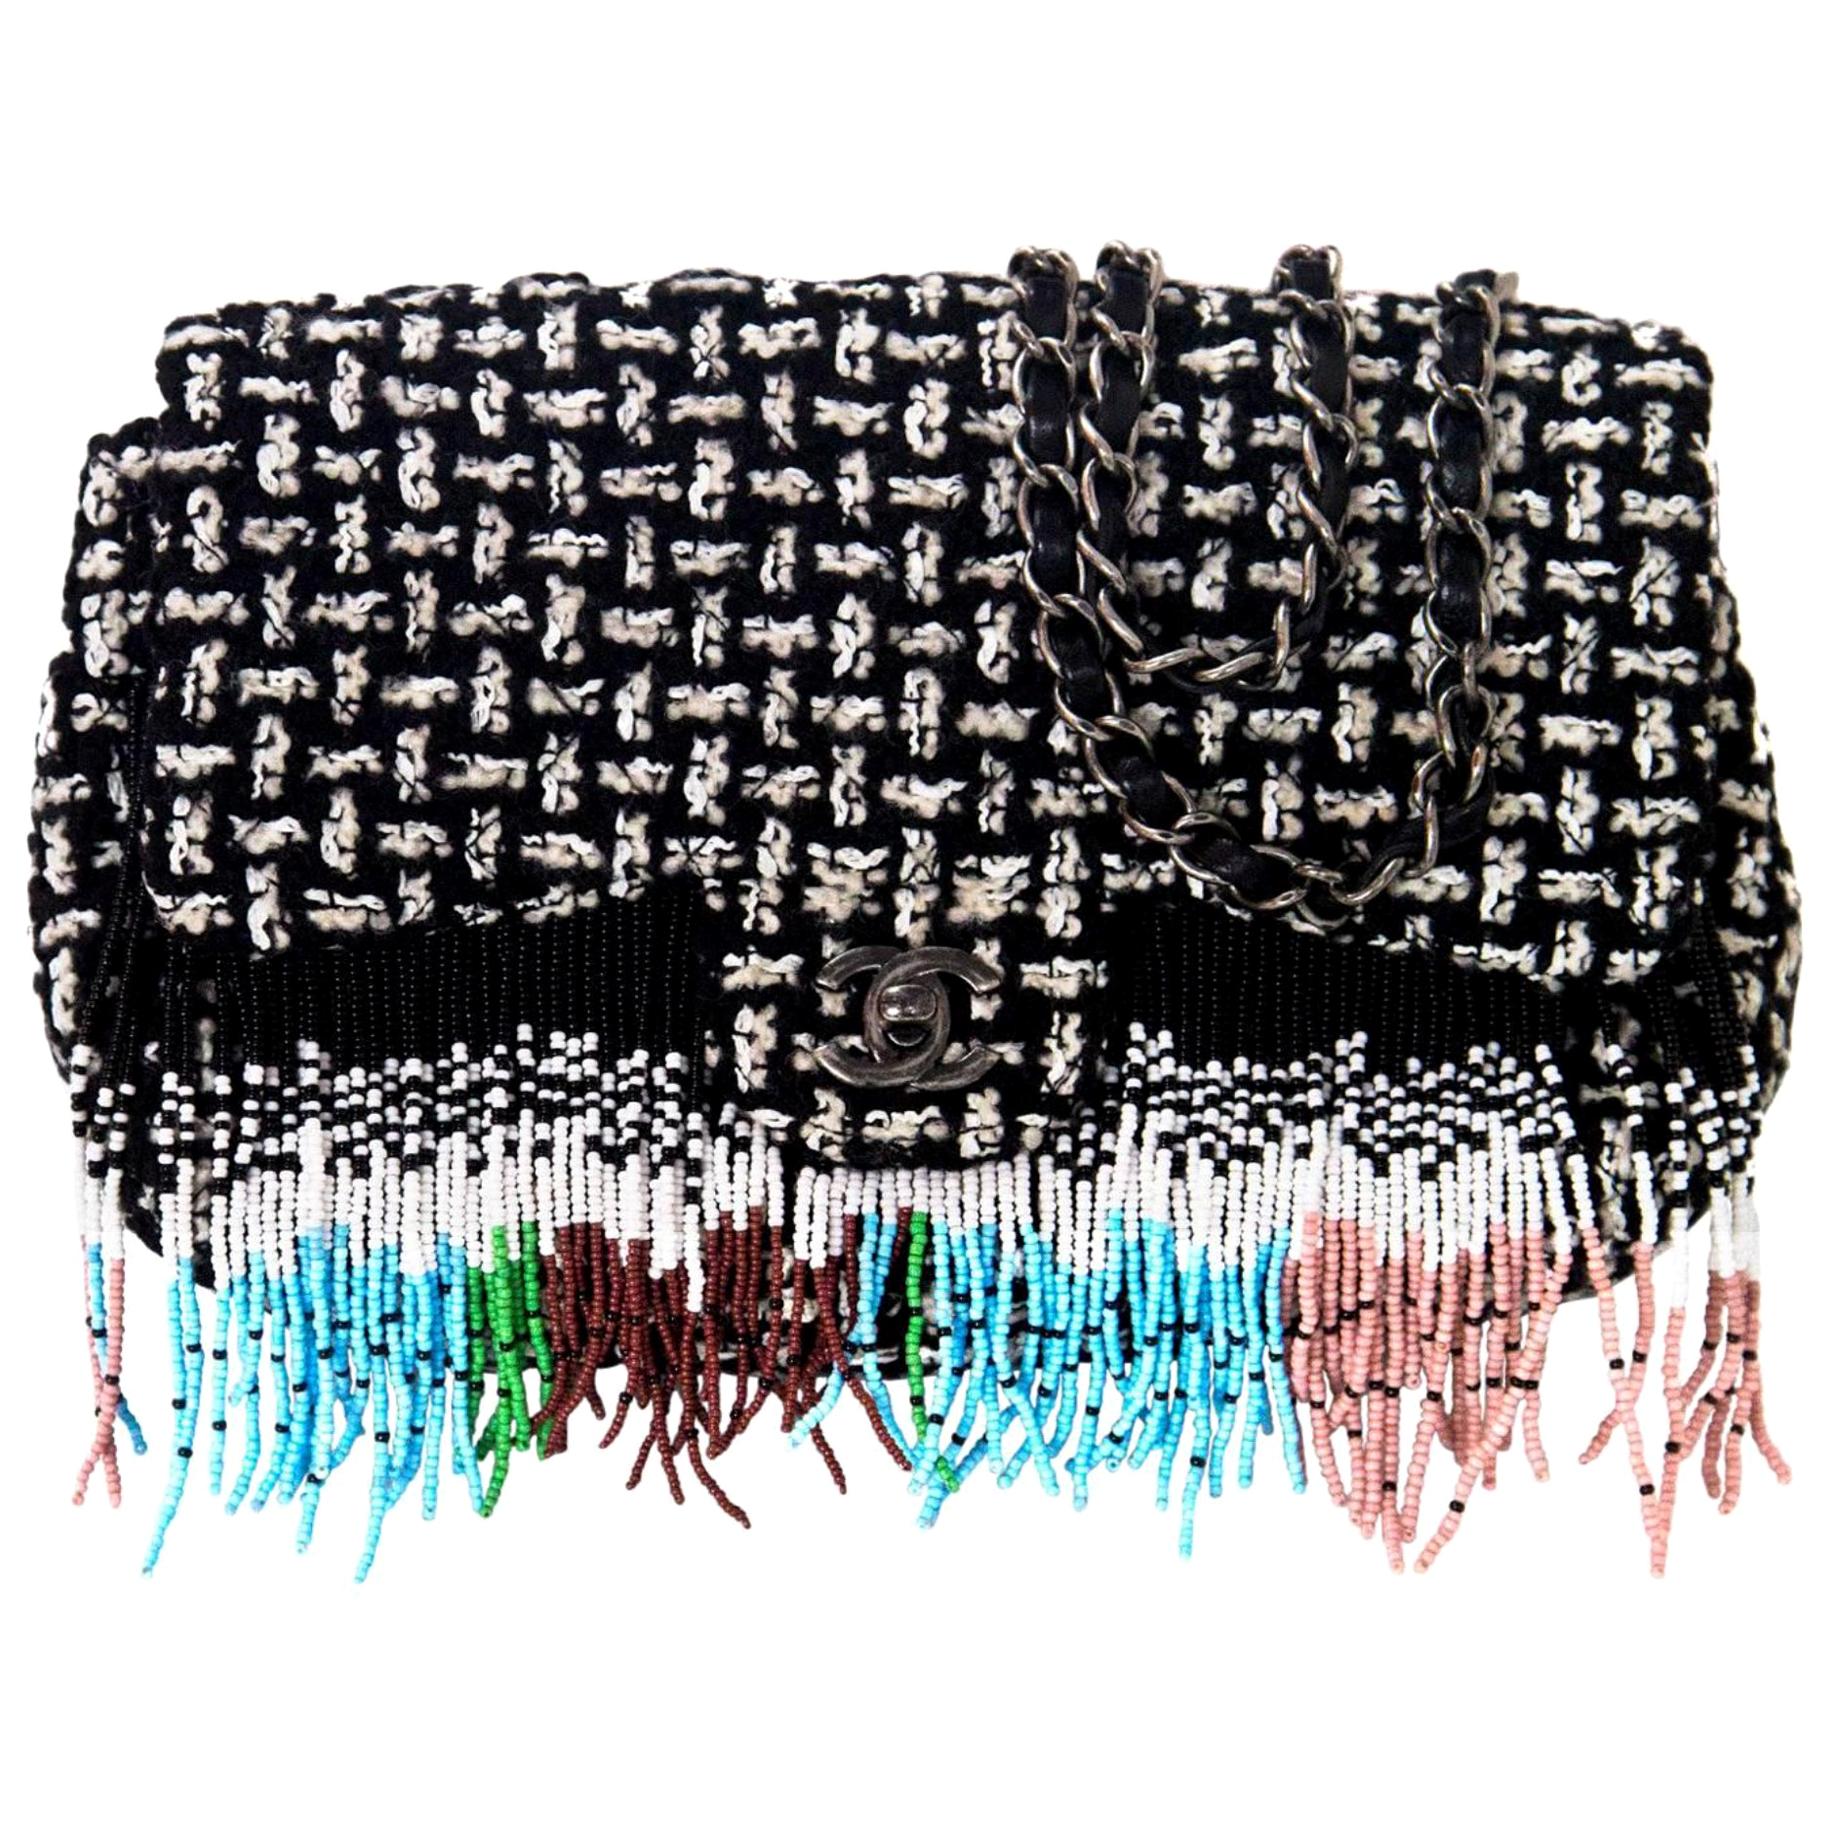 Chanel Dallas Metiers D'art 2014 Beaded Fringe Rare Tweed Classic Flap Bag For Sale